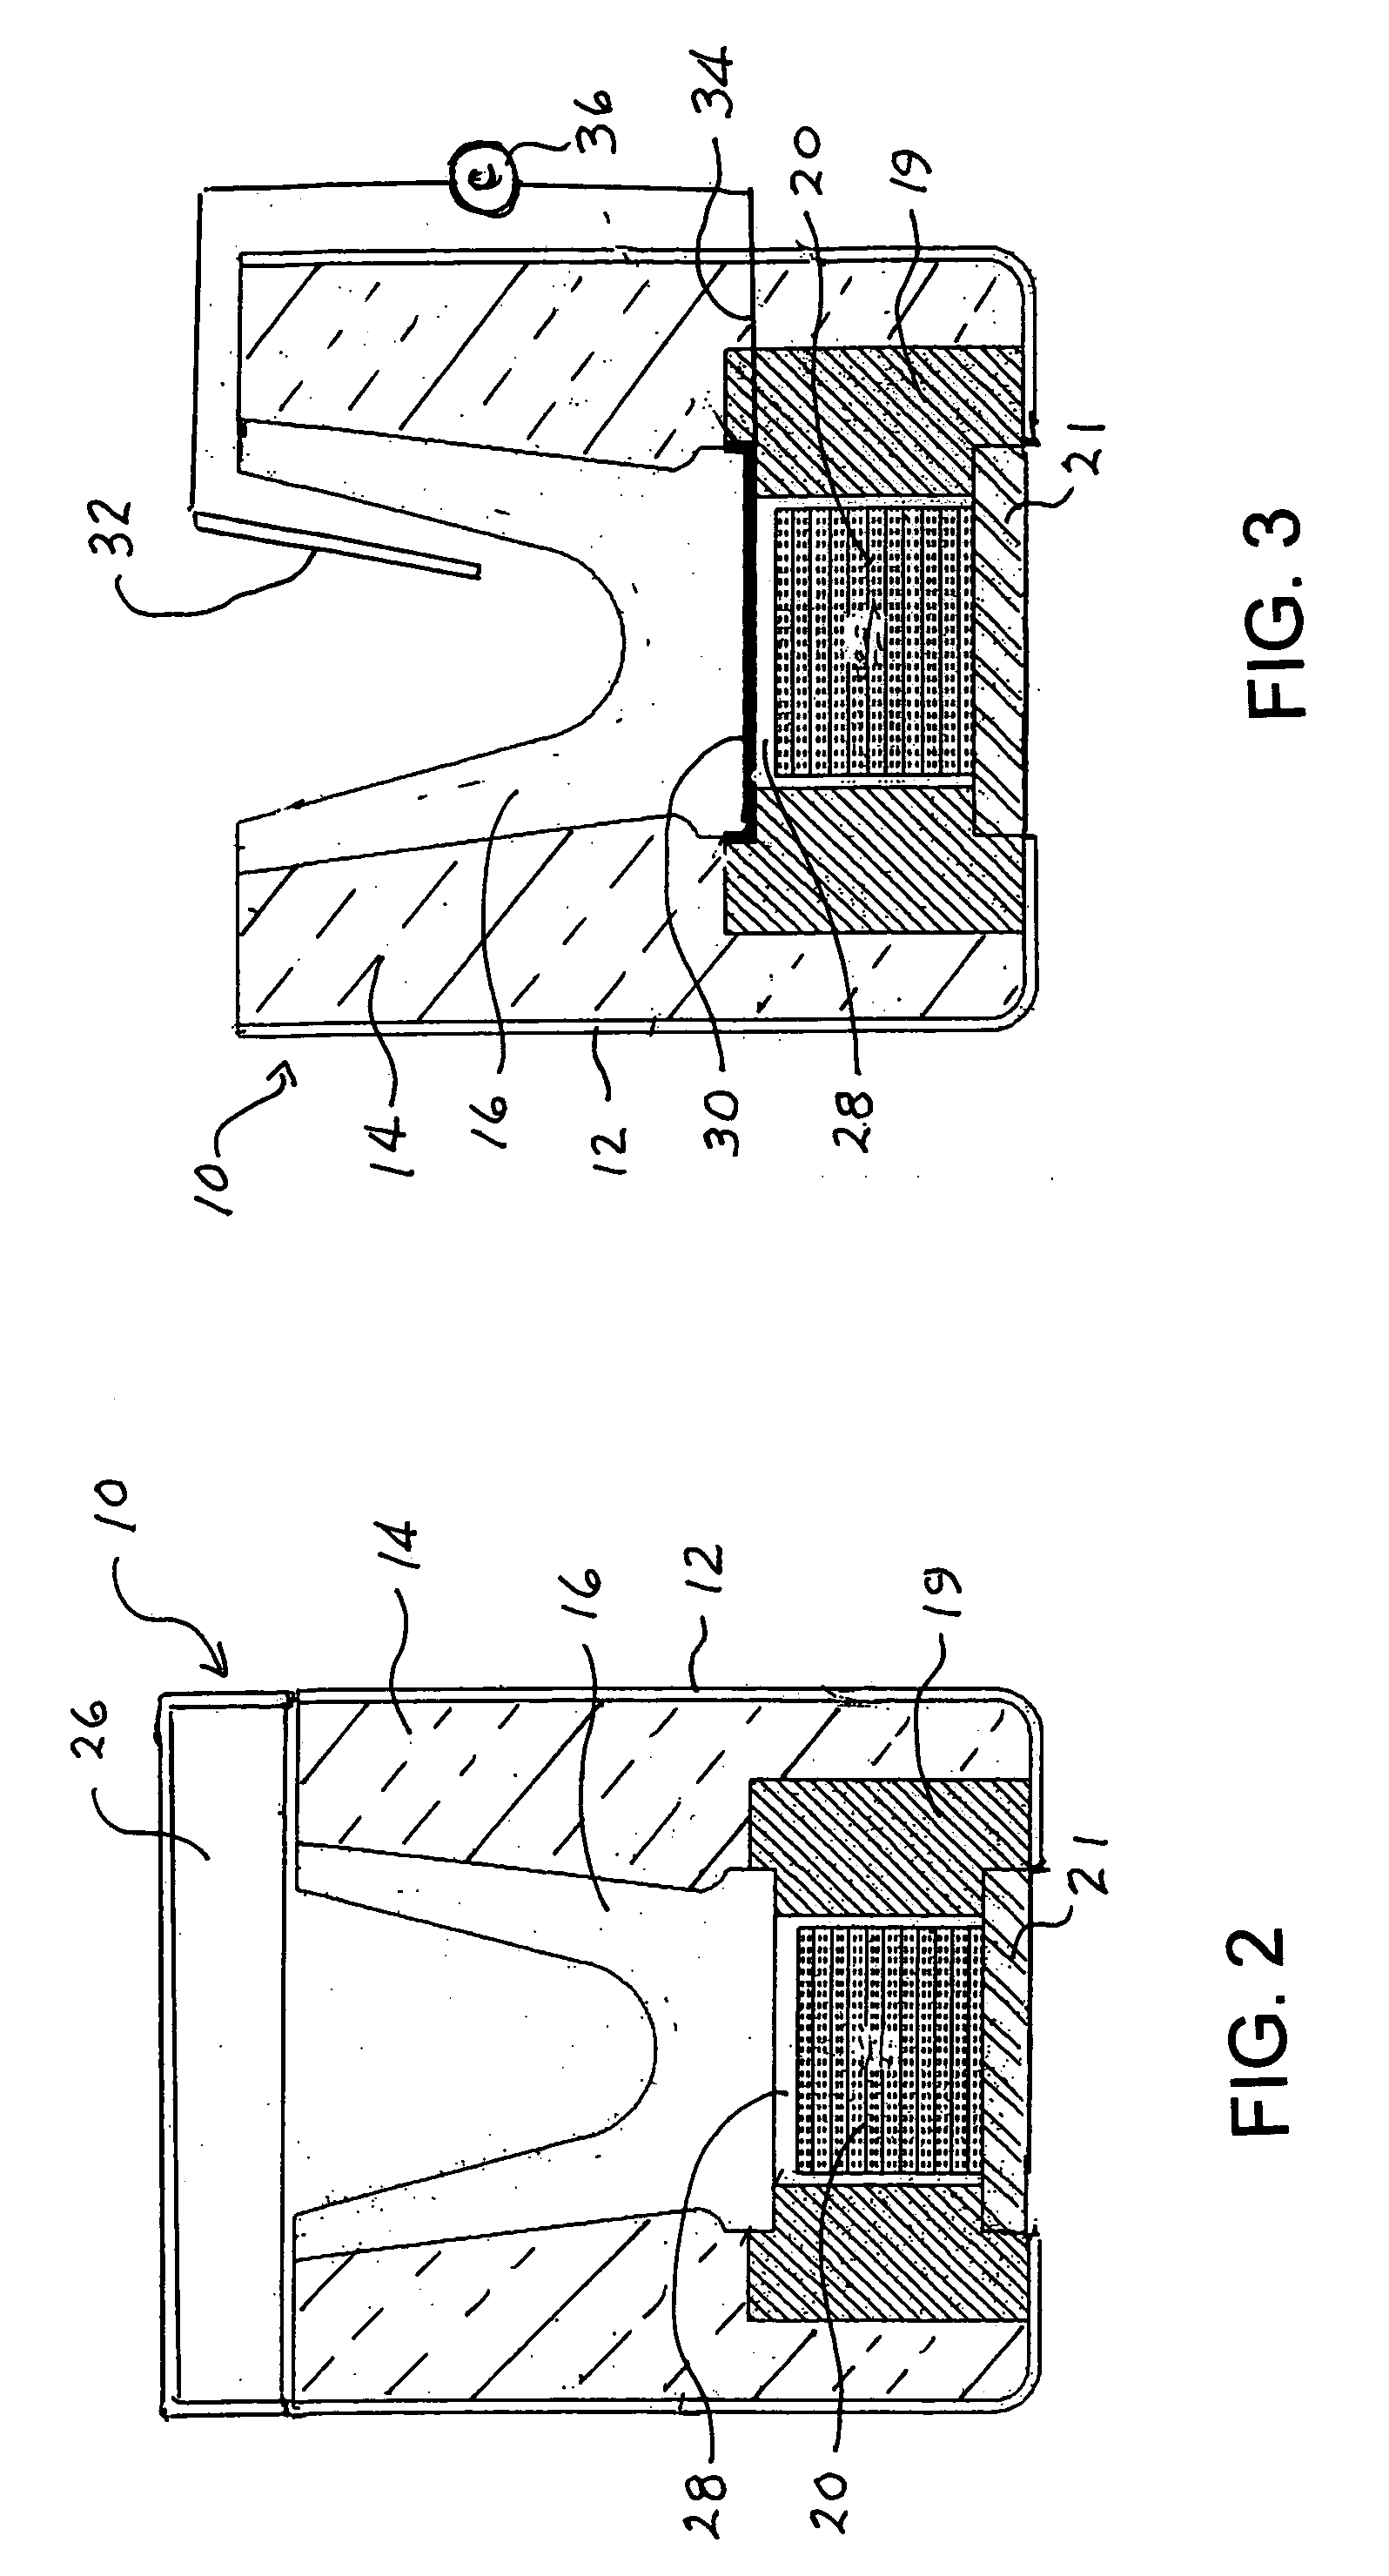 Heated trough for molten metal